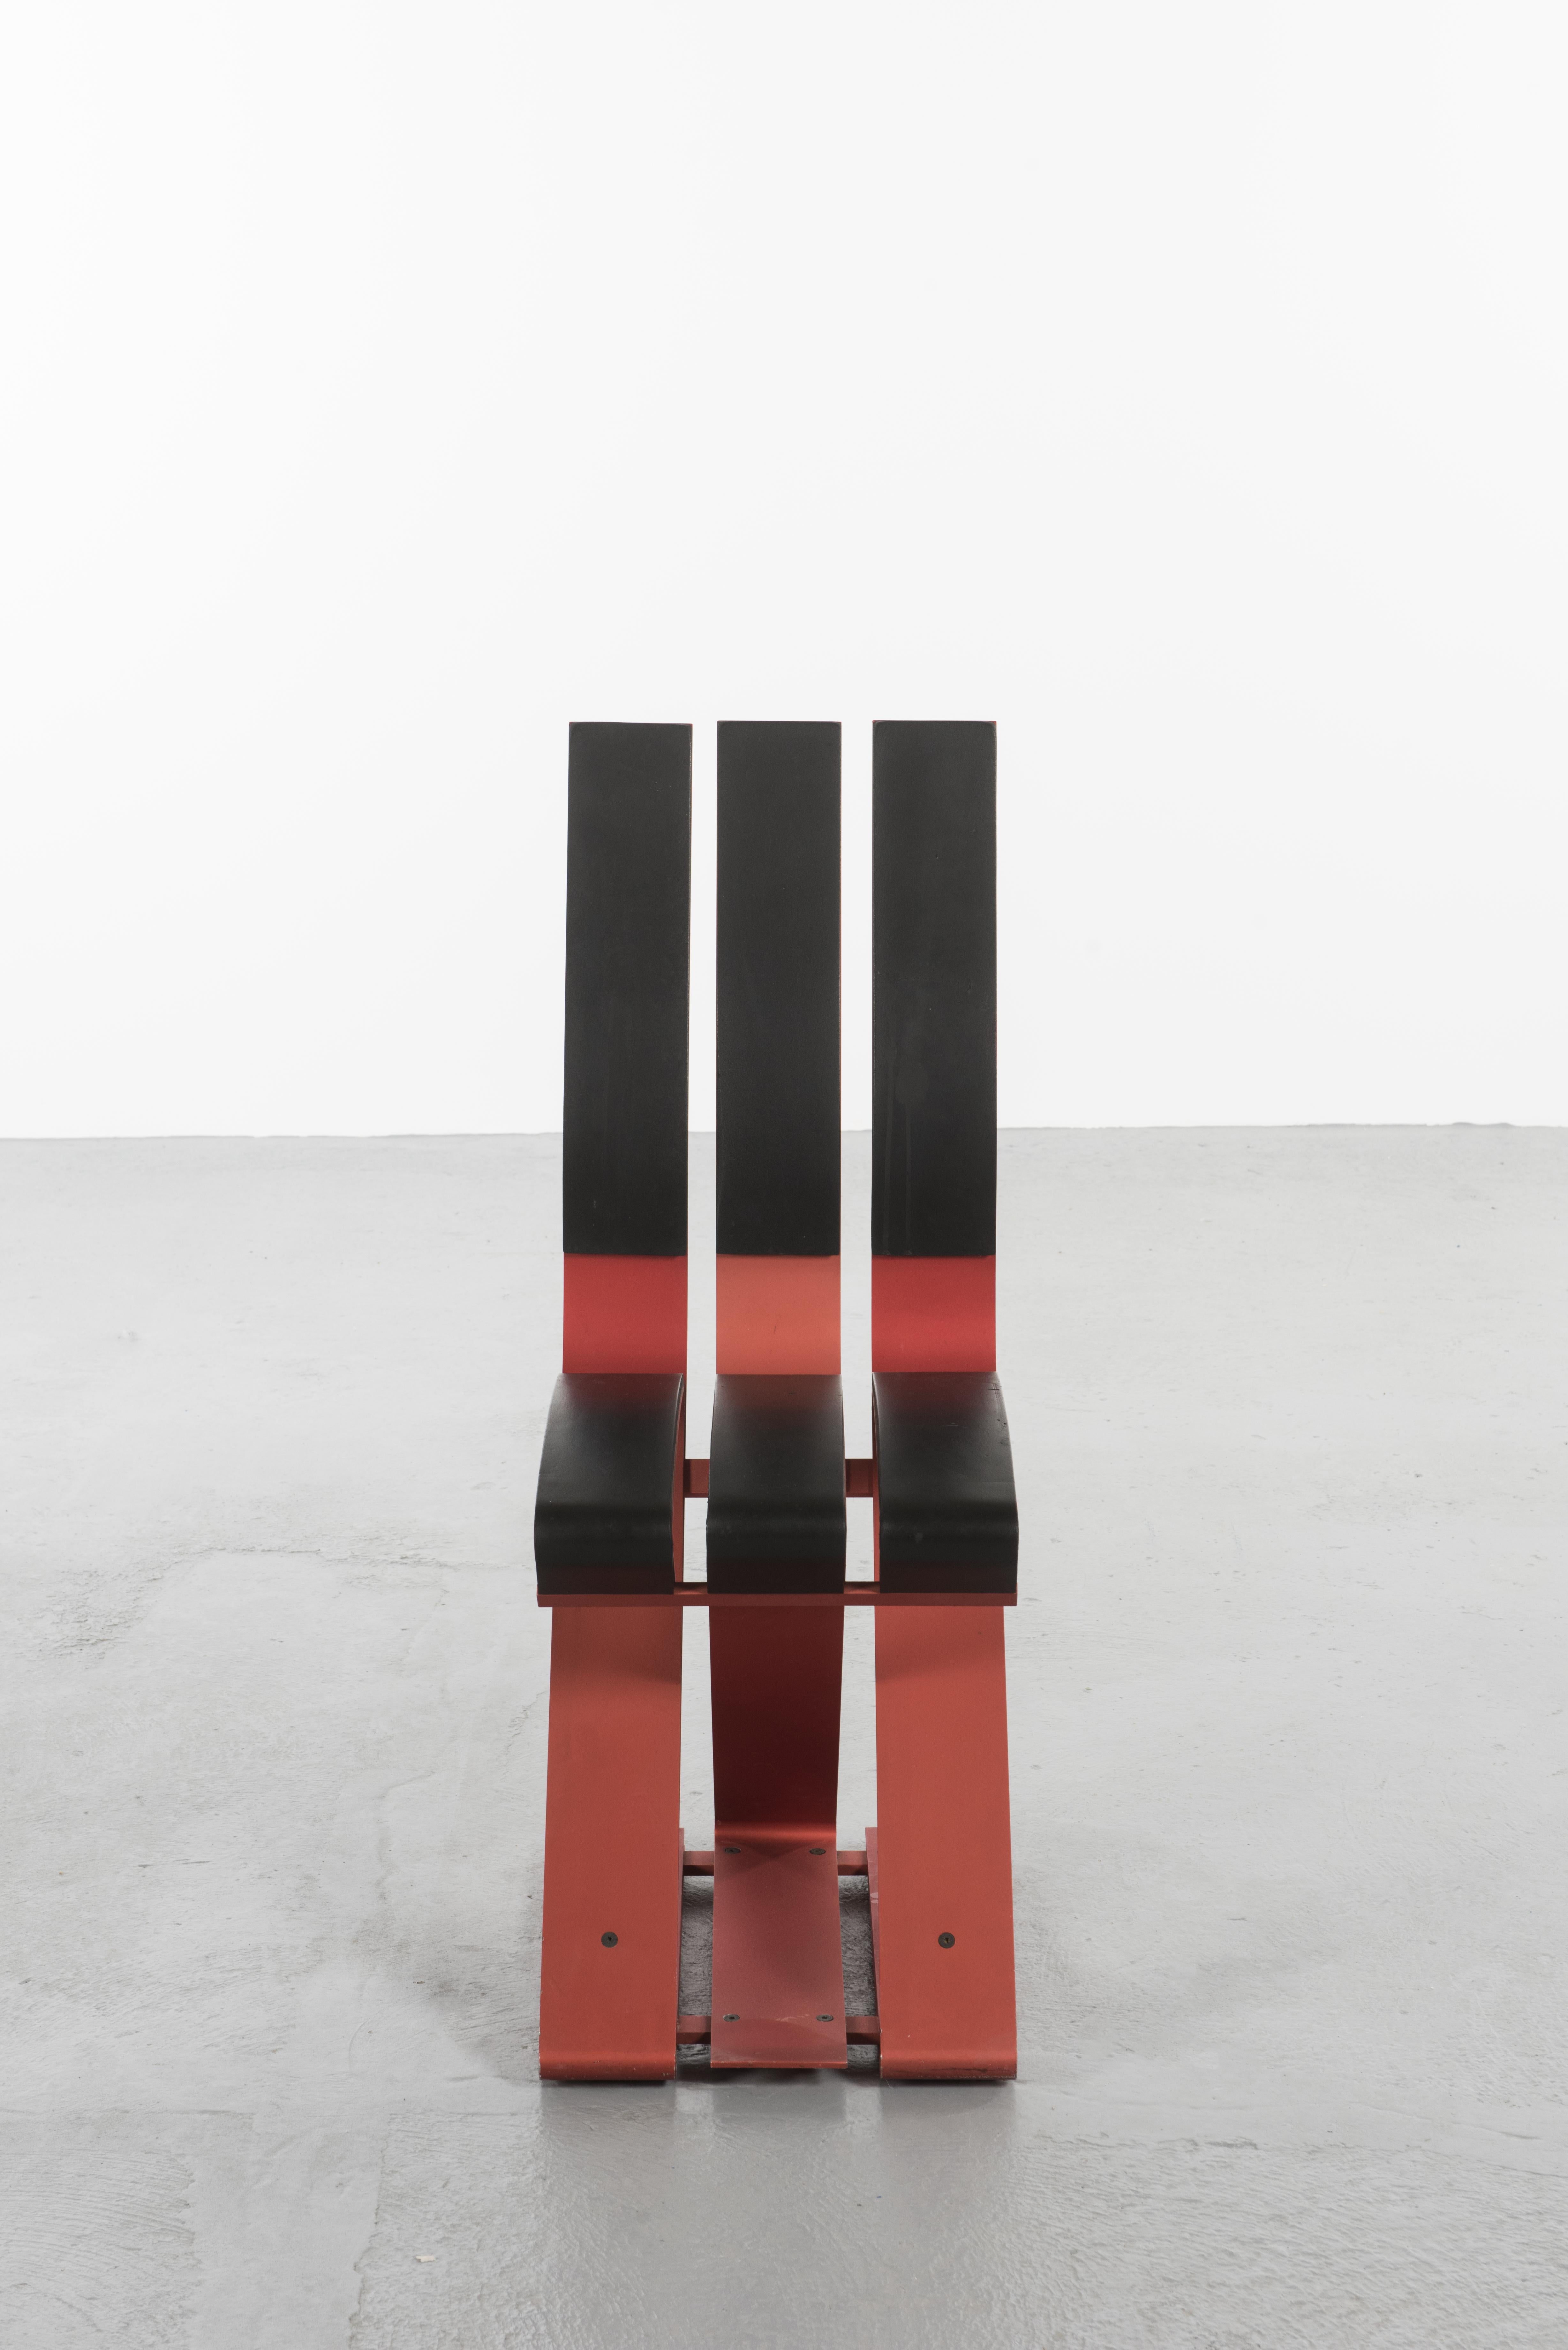 School chair by Ron Arad Edited by Vitra, 1988
Enameled aluminum and rubber 
Red aluminum blade structure partially covered with six strips of black neoprene designed by Ron Arad and produced by Vitra

This piece could be a flagship product of the